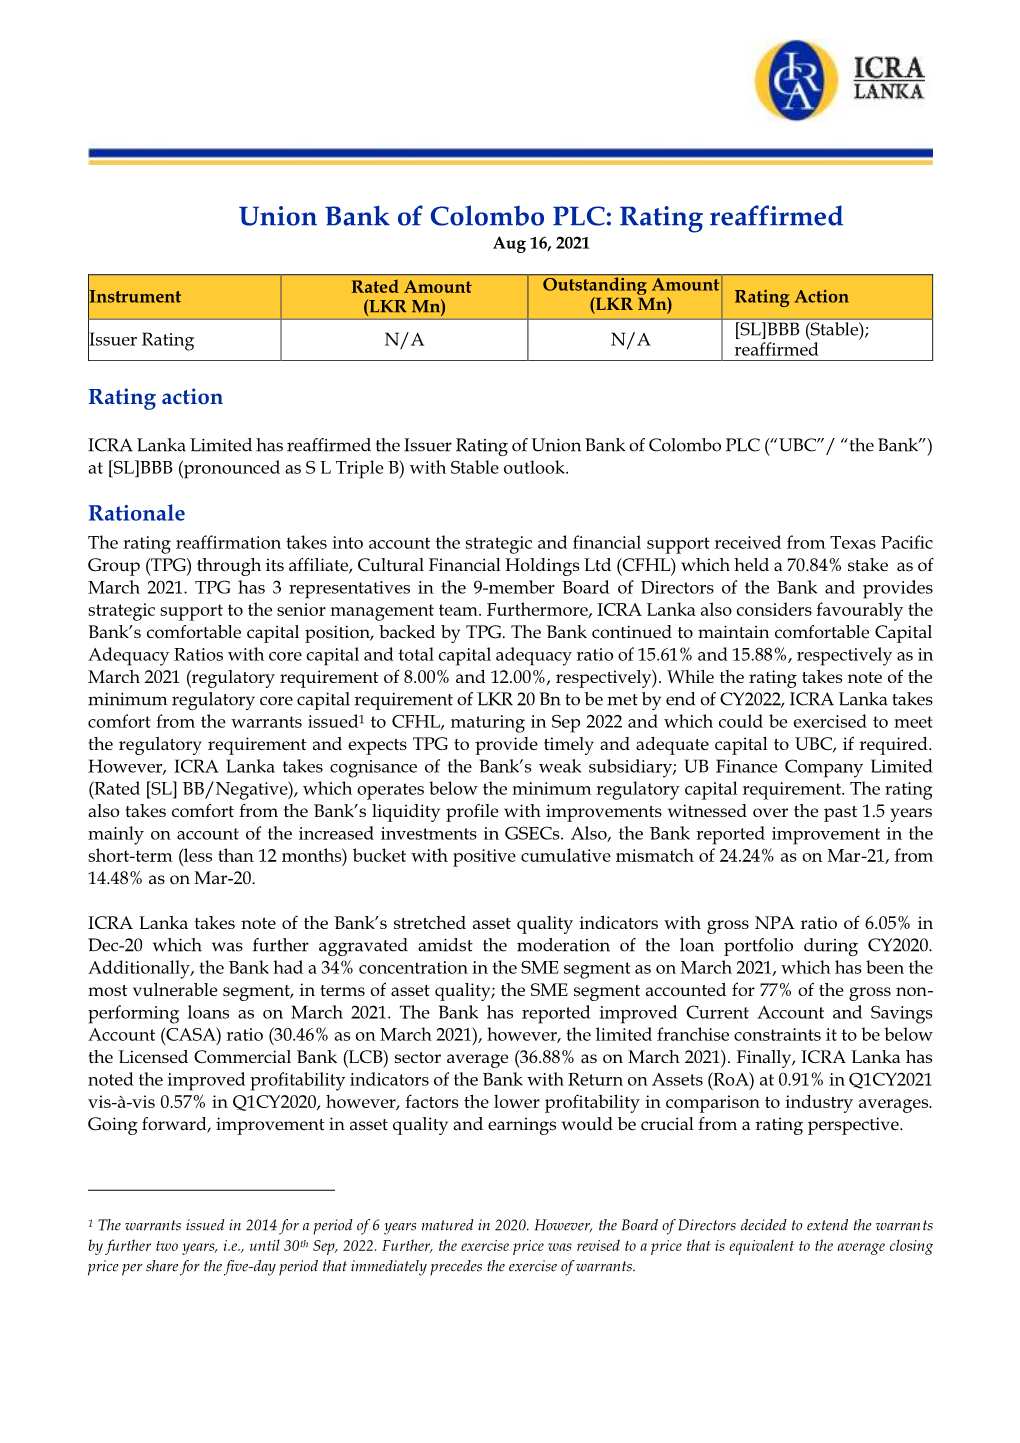 Union Bank of Colombo PLC: Rating Reaffirmed Aug 16, 2021